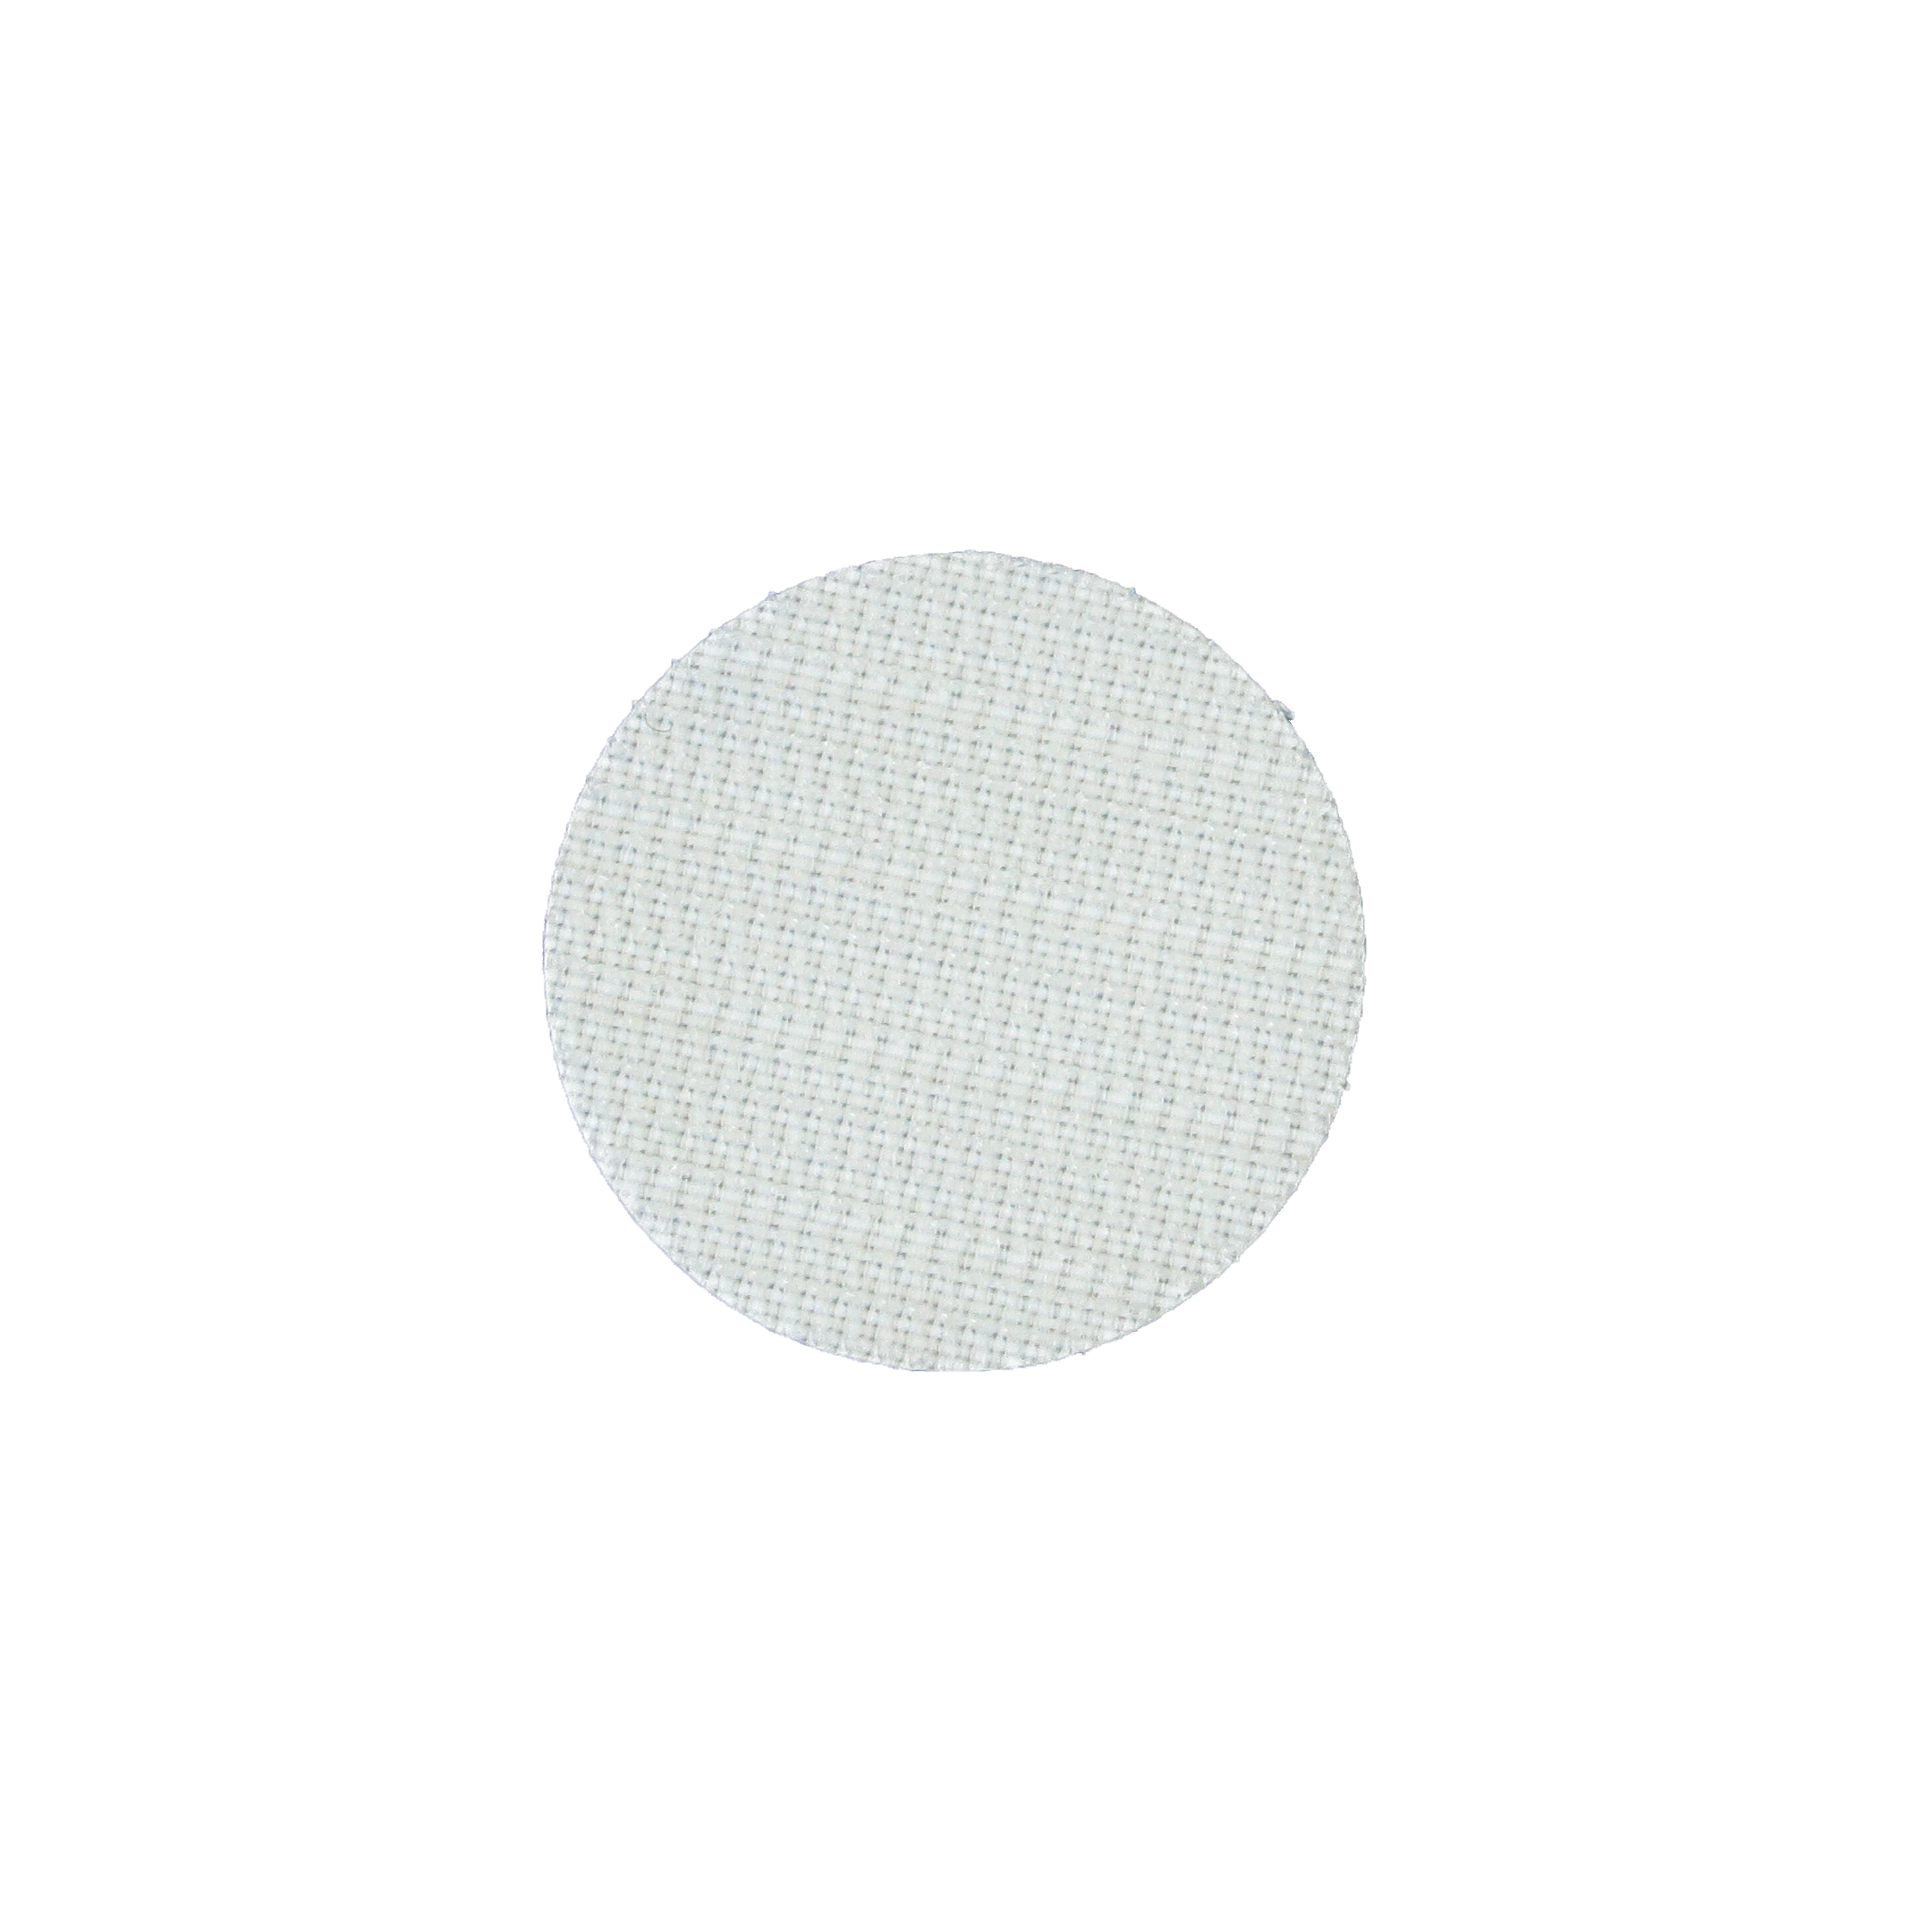 1/2 WHITE VELCRO® BRAND VELCOIN® HOOK ADHESIVE BACKED - COINS, CIRCLES, &  DOTS